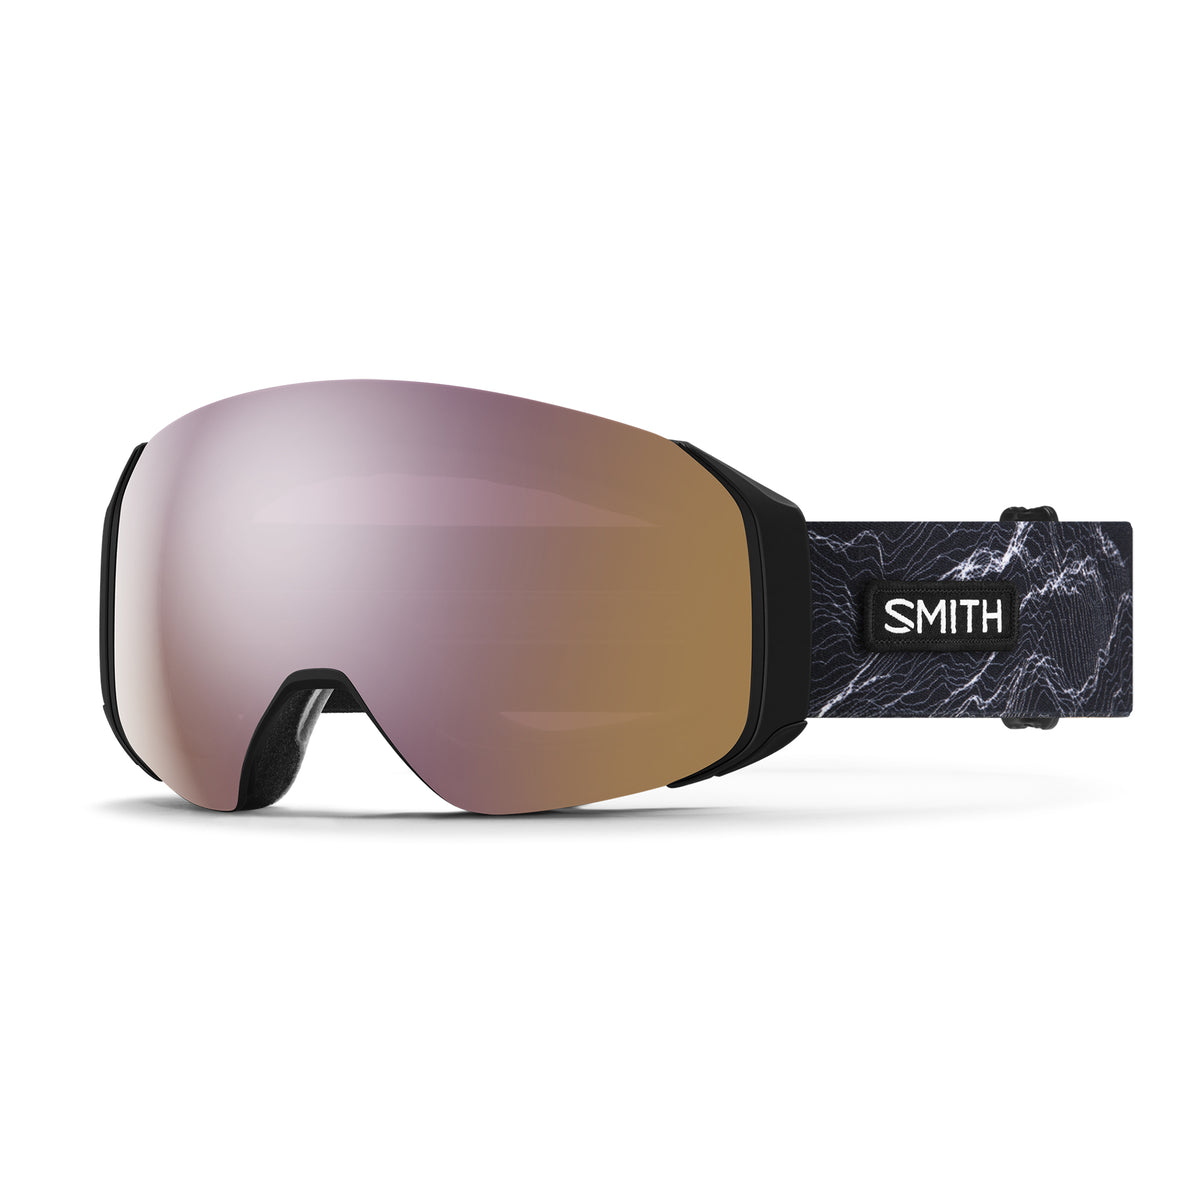 Smith 4D MAG S Snow Goggles